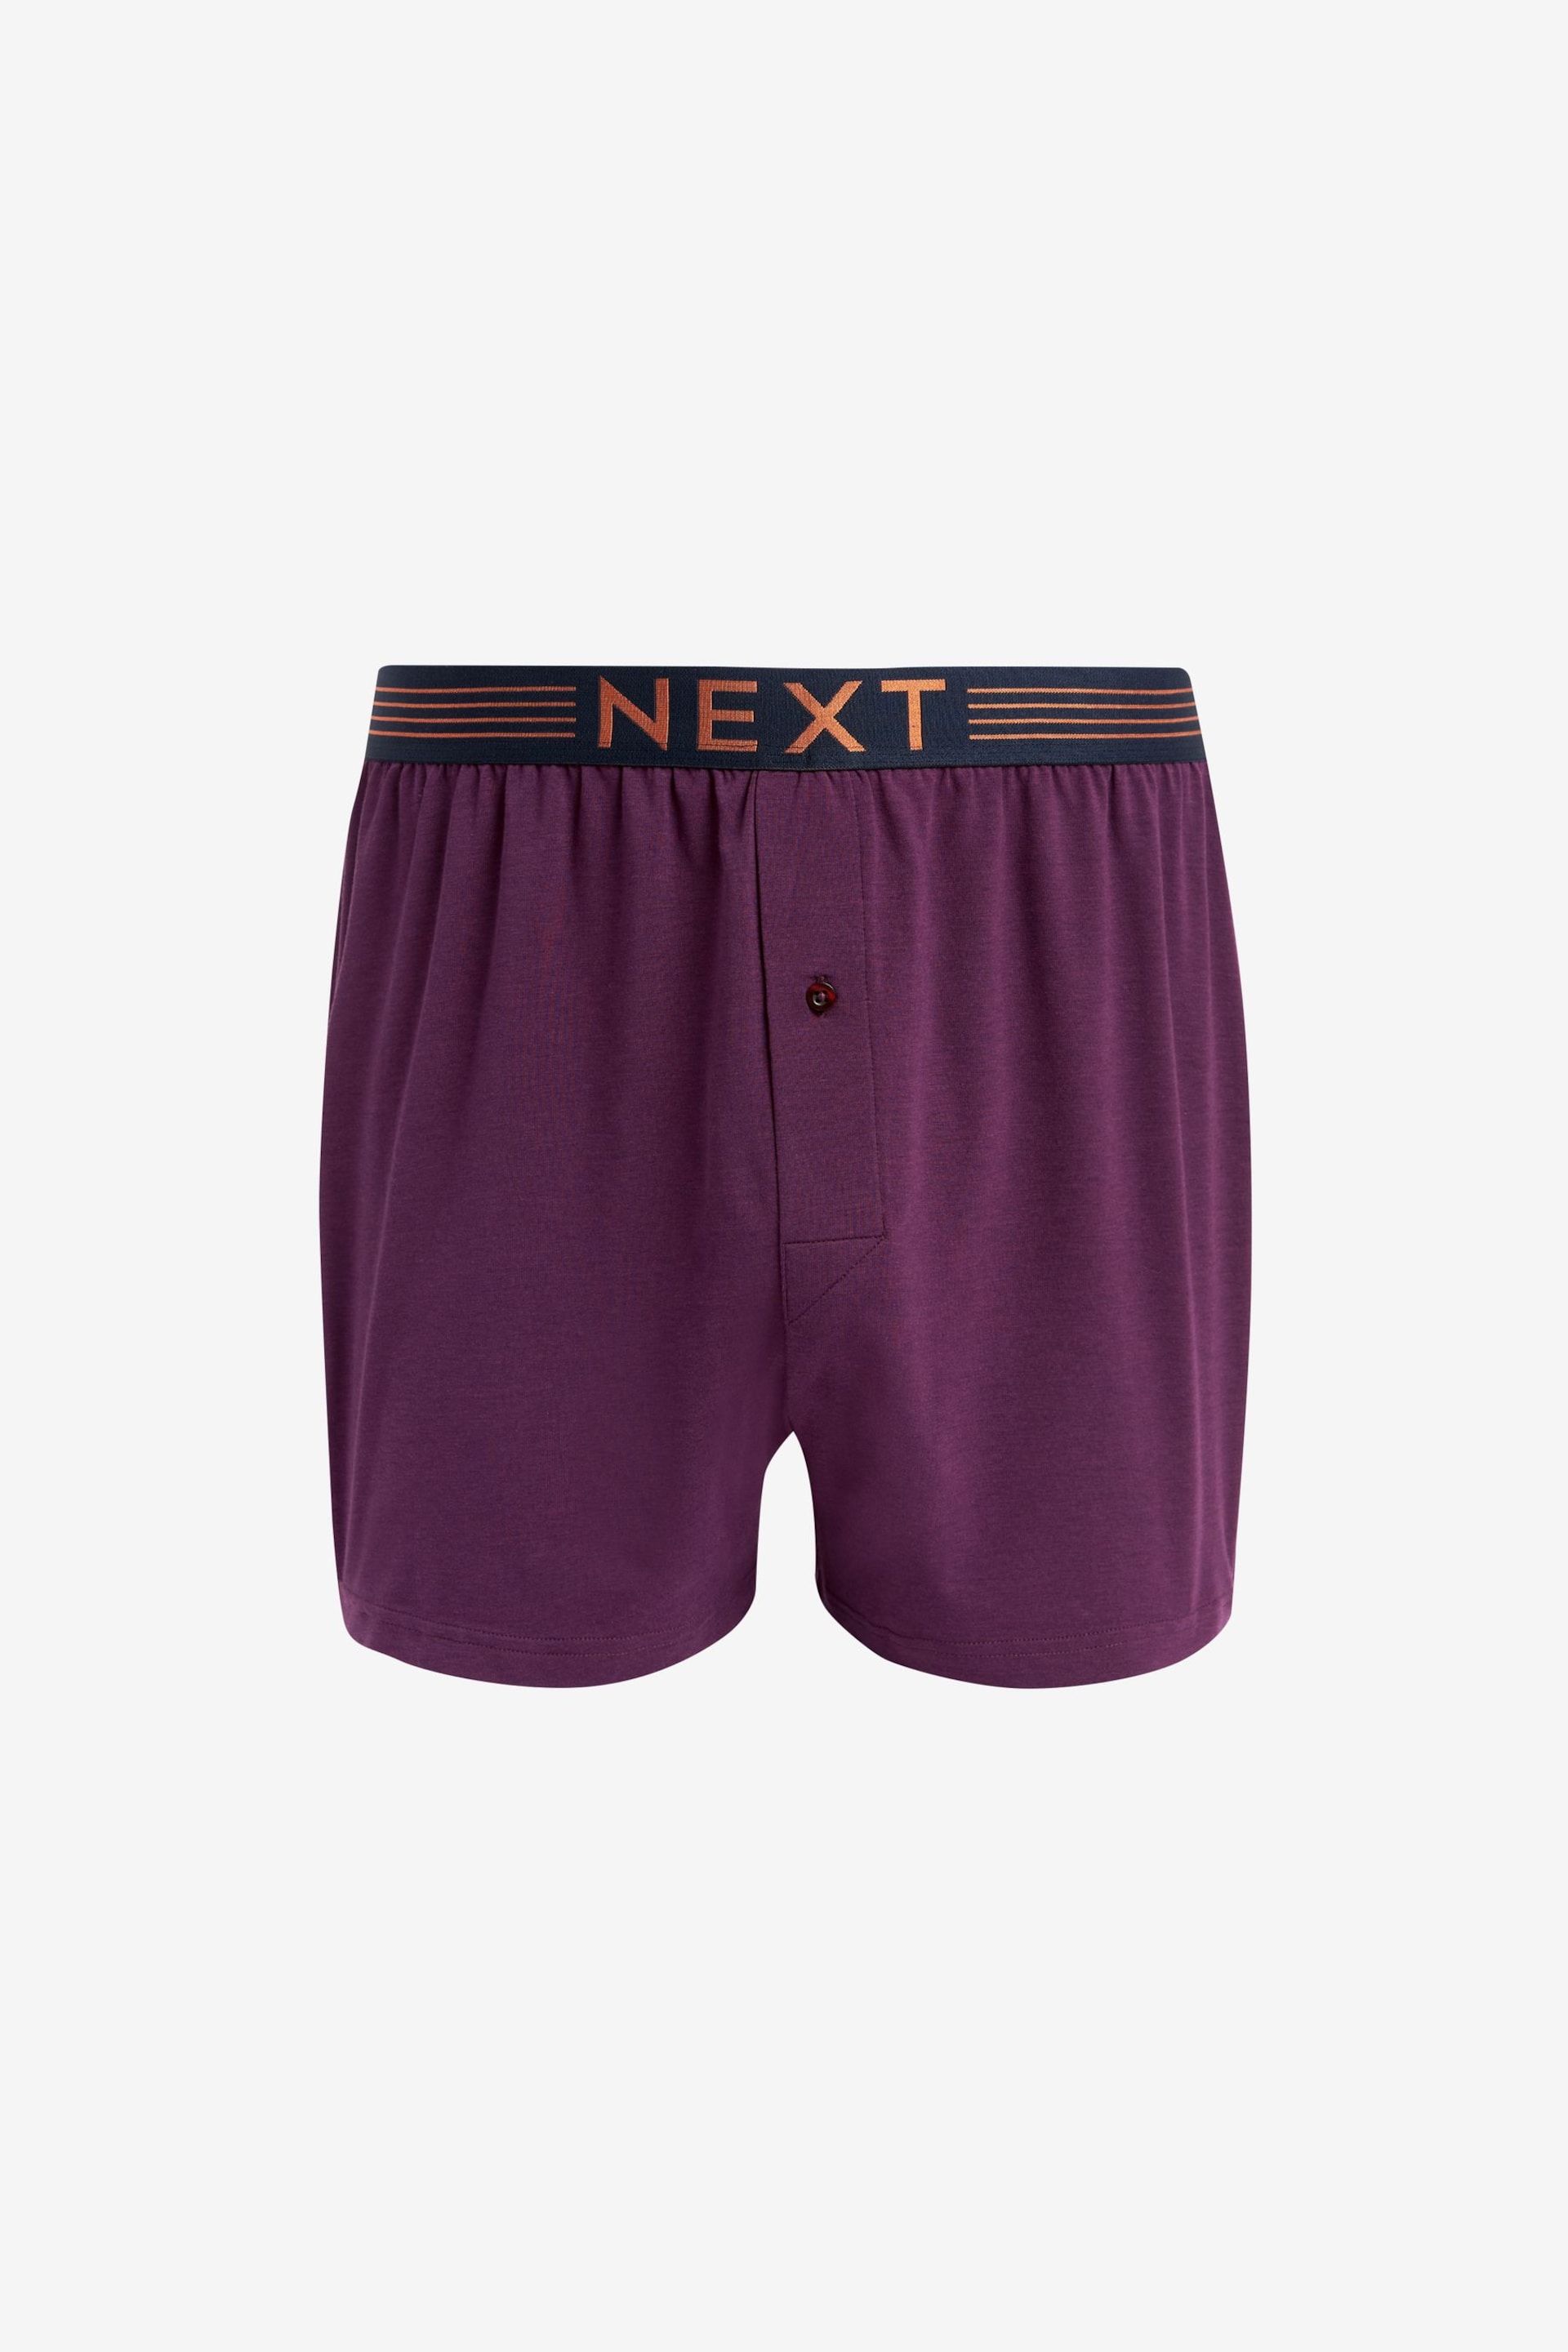 Rich Purple/Bronze 4 pack Signature Bamboo Boxers - Image 2 of 7